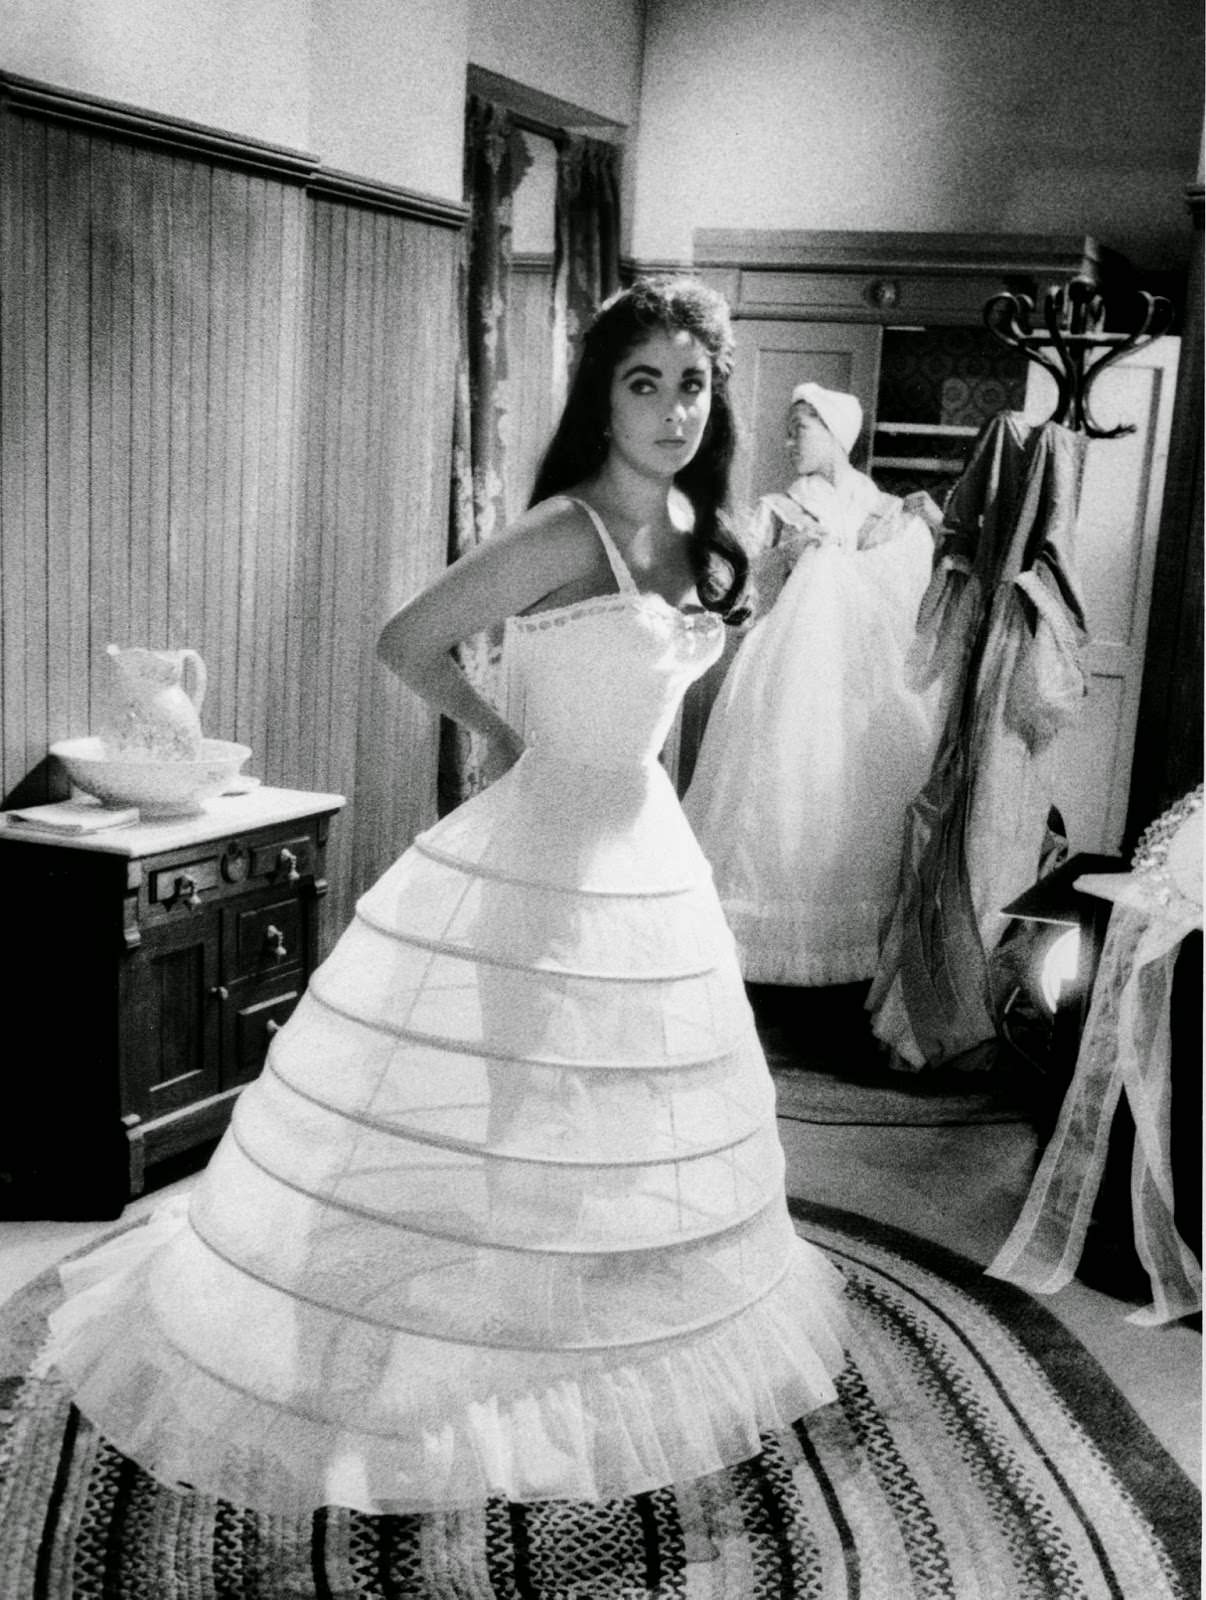 Elizabeth Taylor dresses for a scene on MGM's "Raintree County," 1956